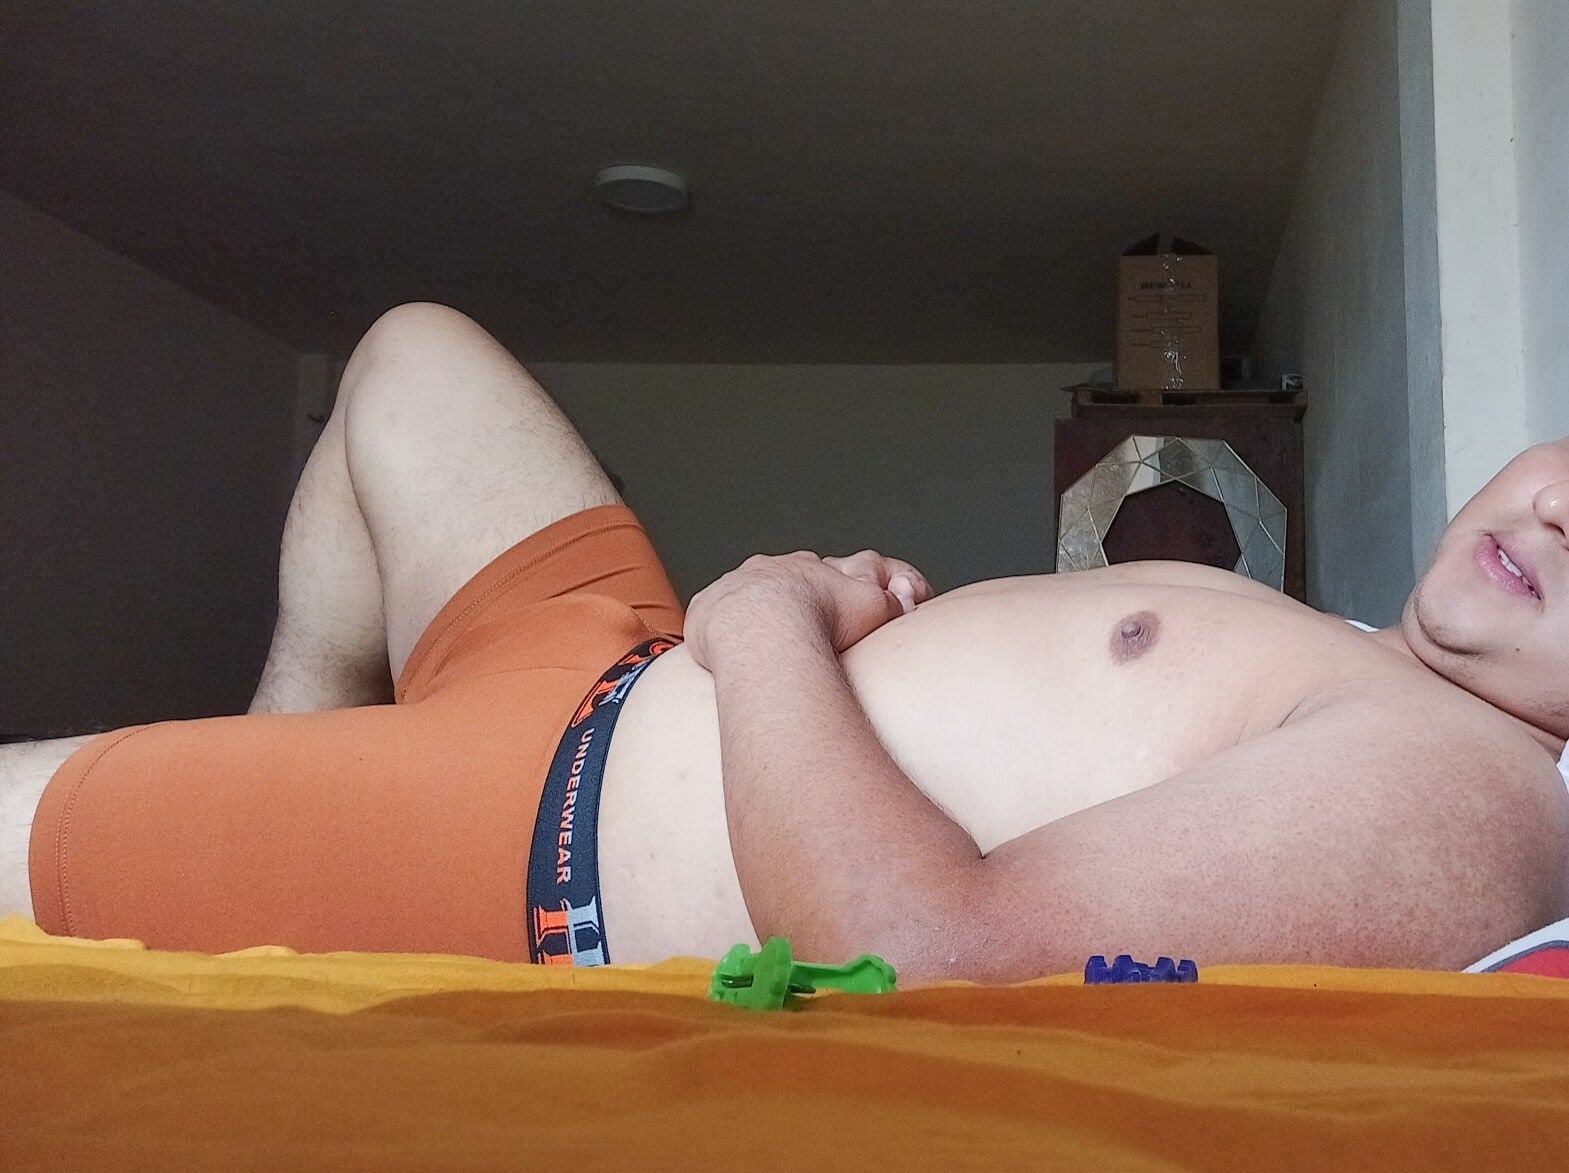 Me Lying Down and my Penis Standing - 01 (In Underwear) #13